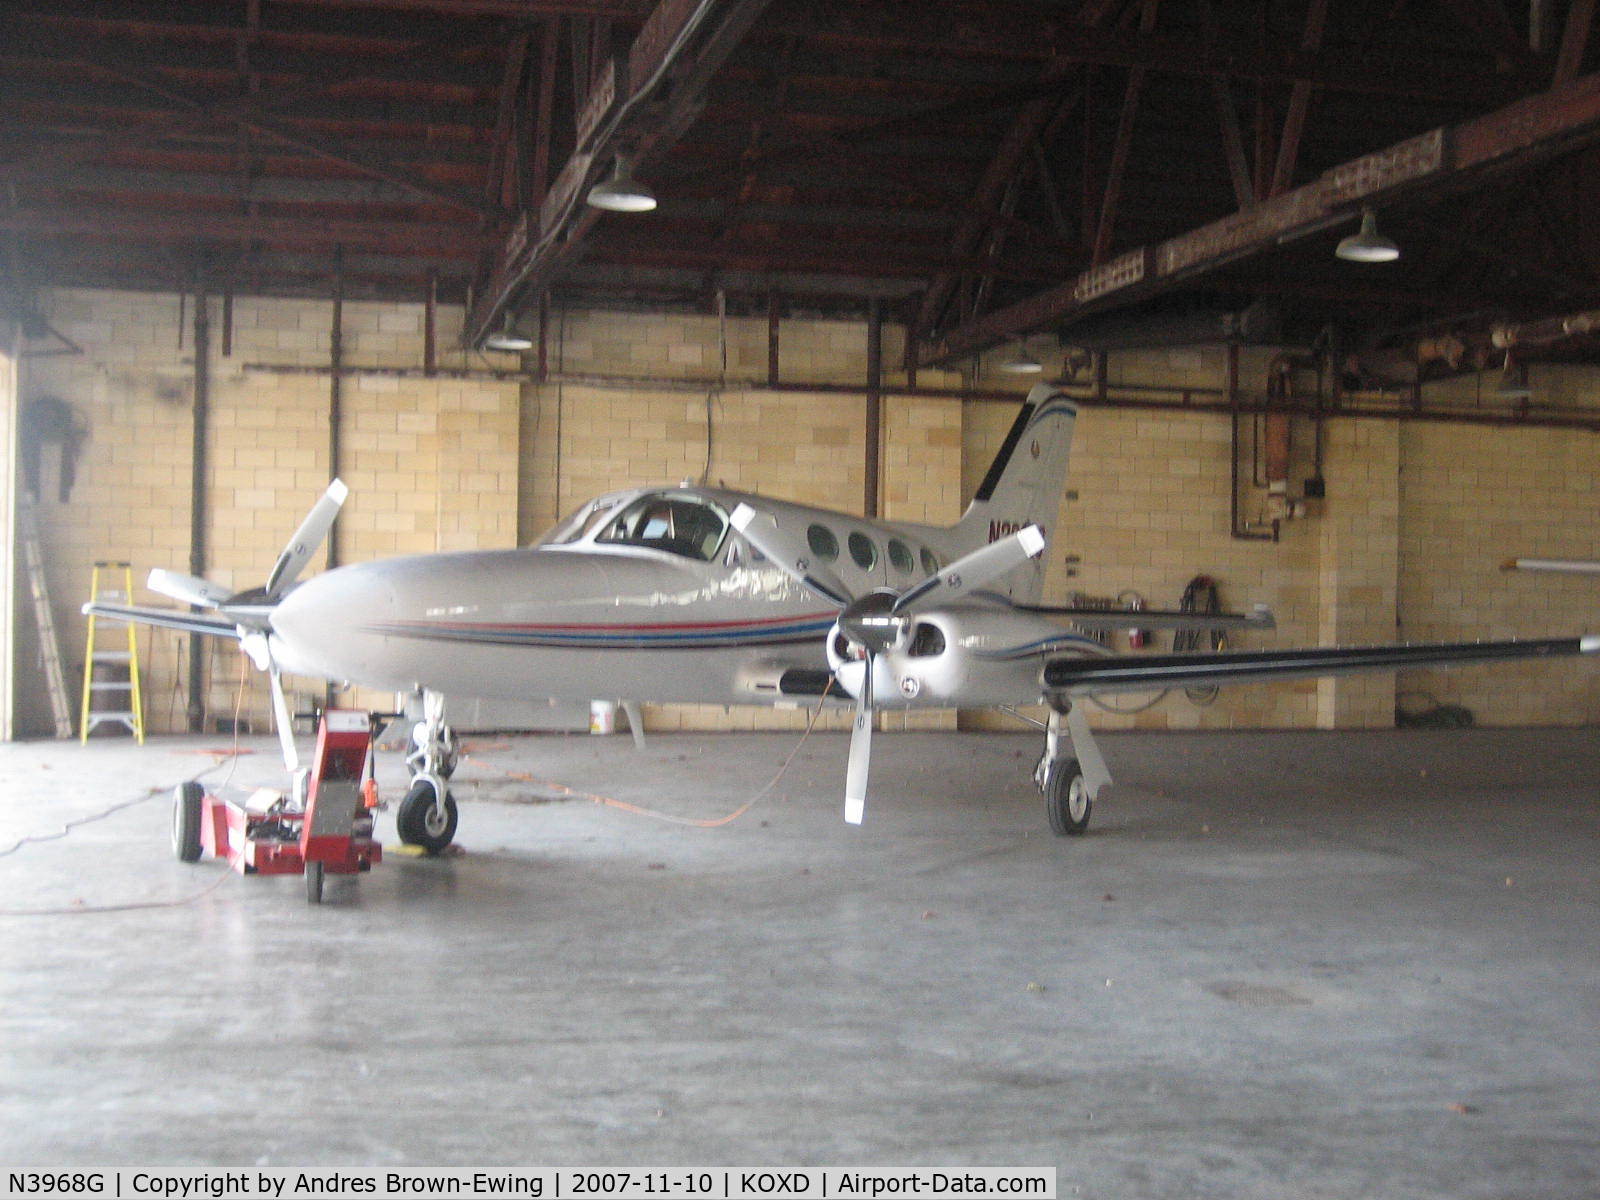 N3968G, 1977 Cessna 421C Golden Eagle C/N 421C0422, one of the planes based here